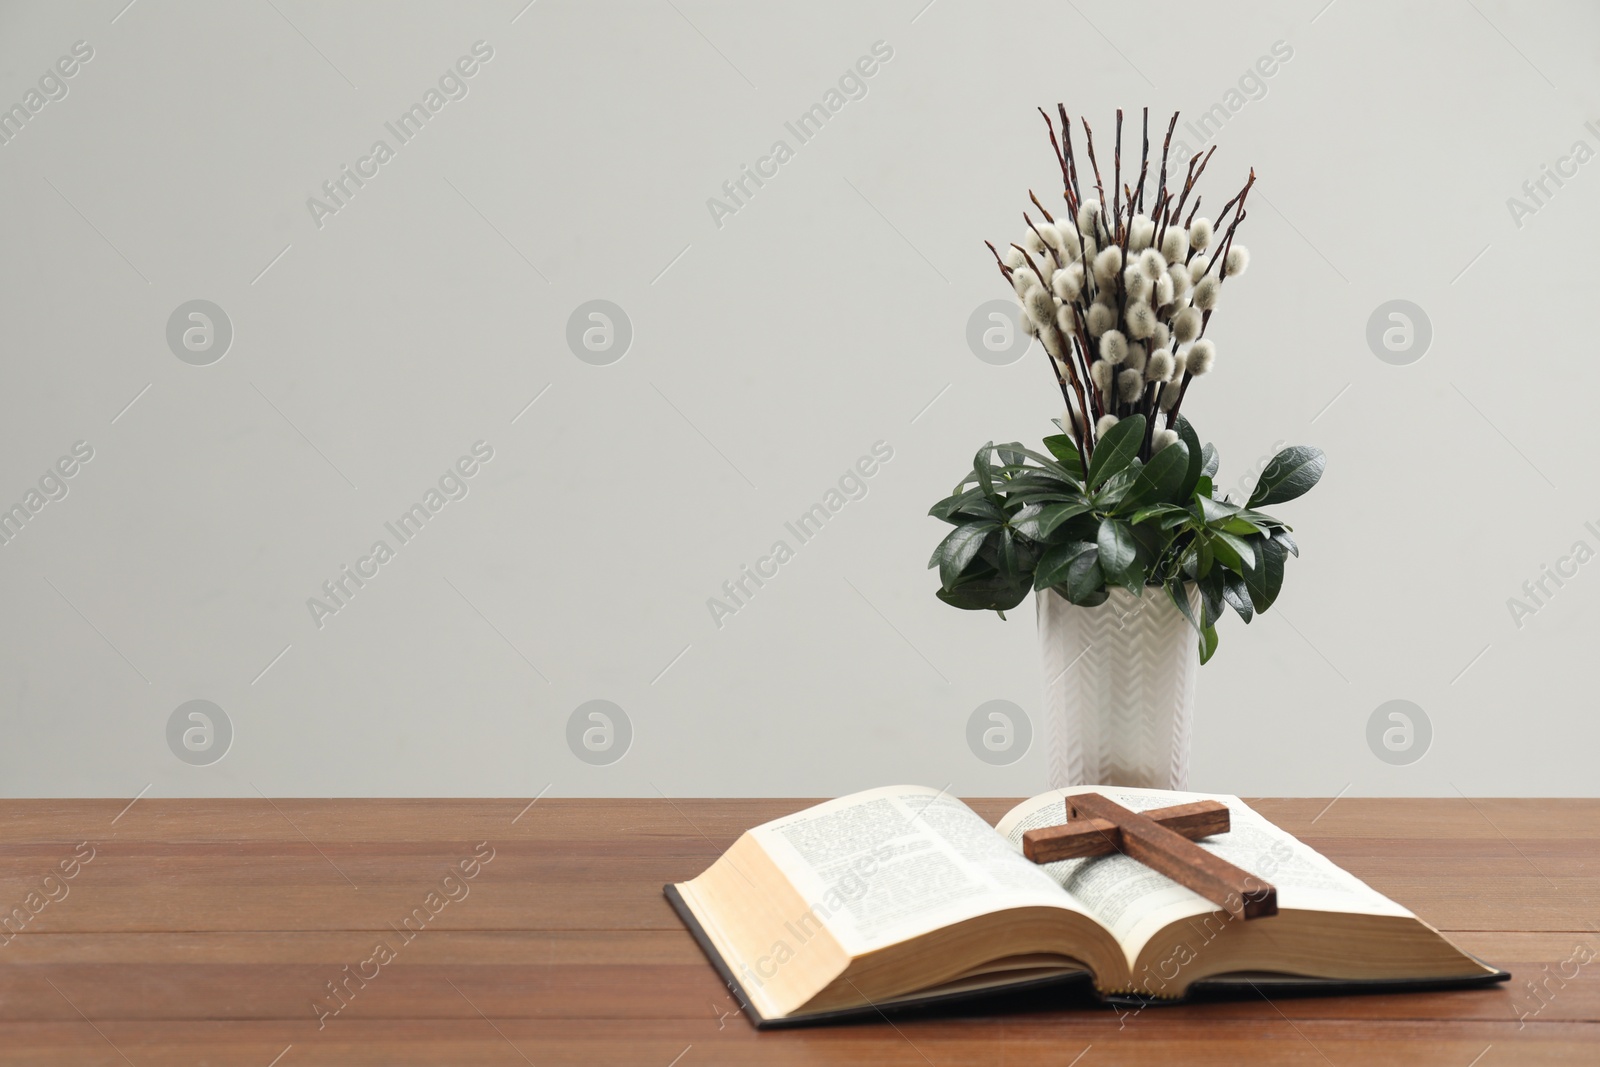 Photo of Bible, plant with willow branches and cross on wooden table, space for text